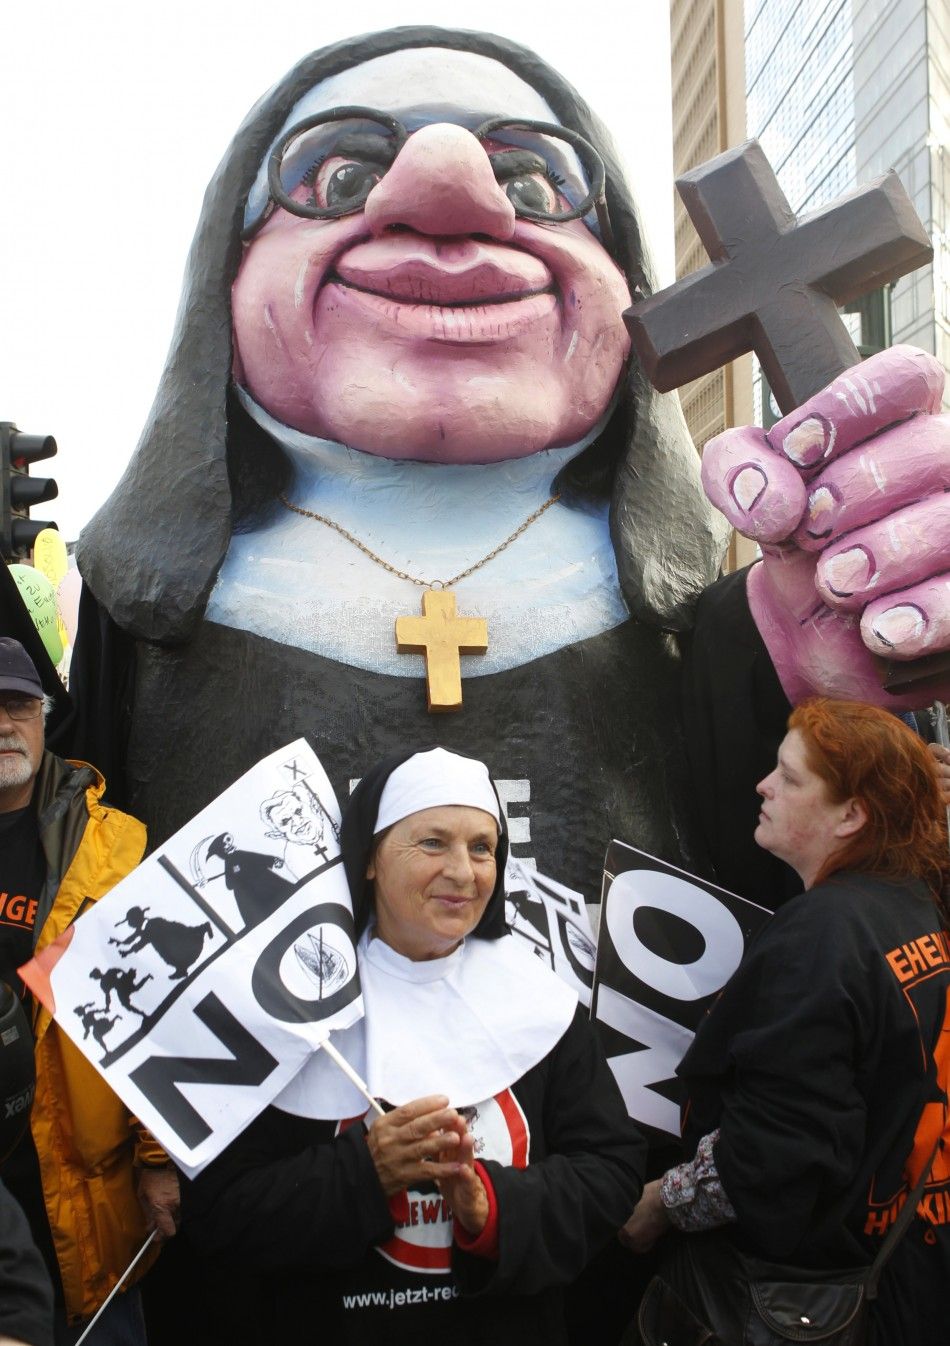 Demonstrators opposing the visit of Pope Benedict XVI dress as Catholic nuns during a protest at Potsdamer Platz in Berlin